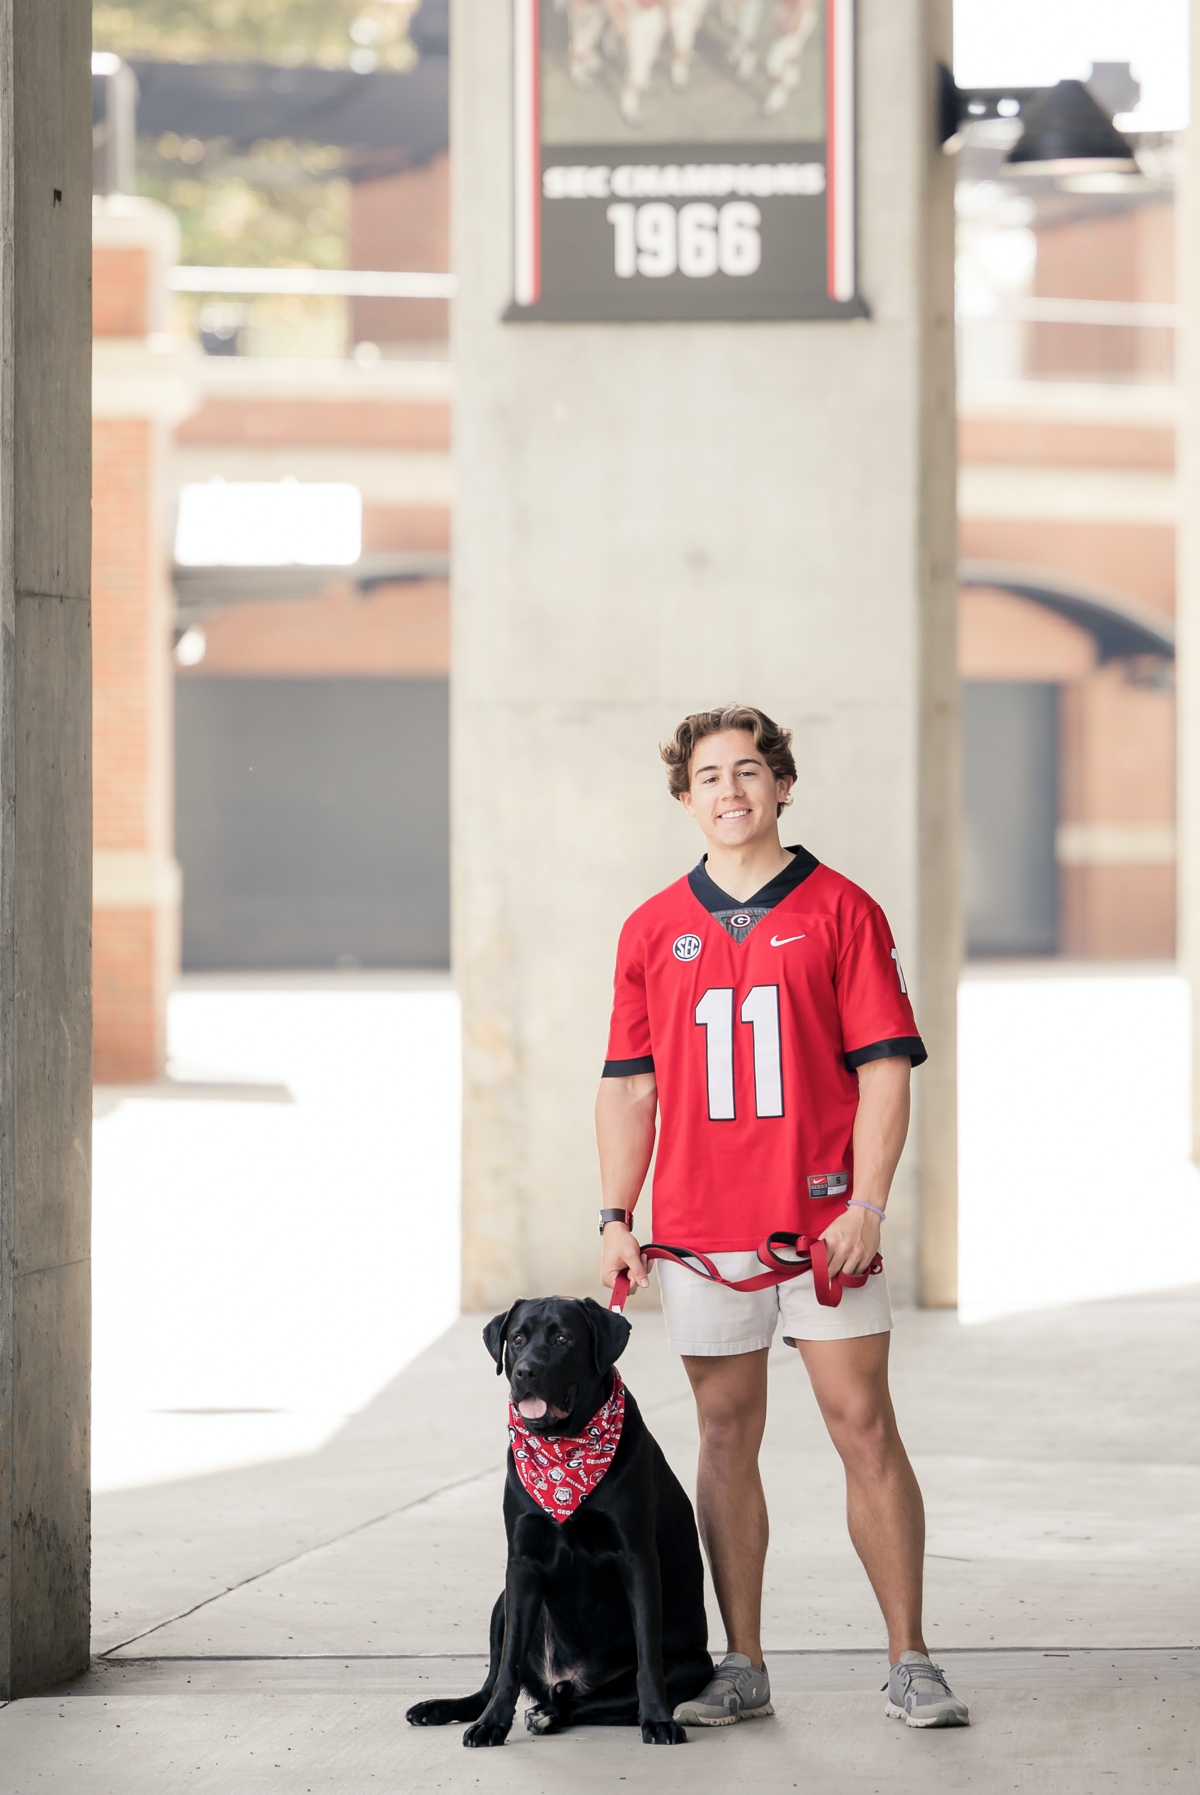 A man in a red jersey stands in the football stadium with his dog during his graduation photo session at UGA